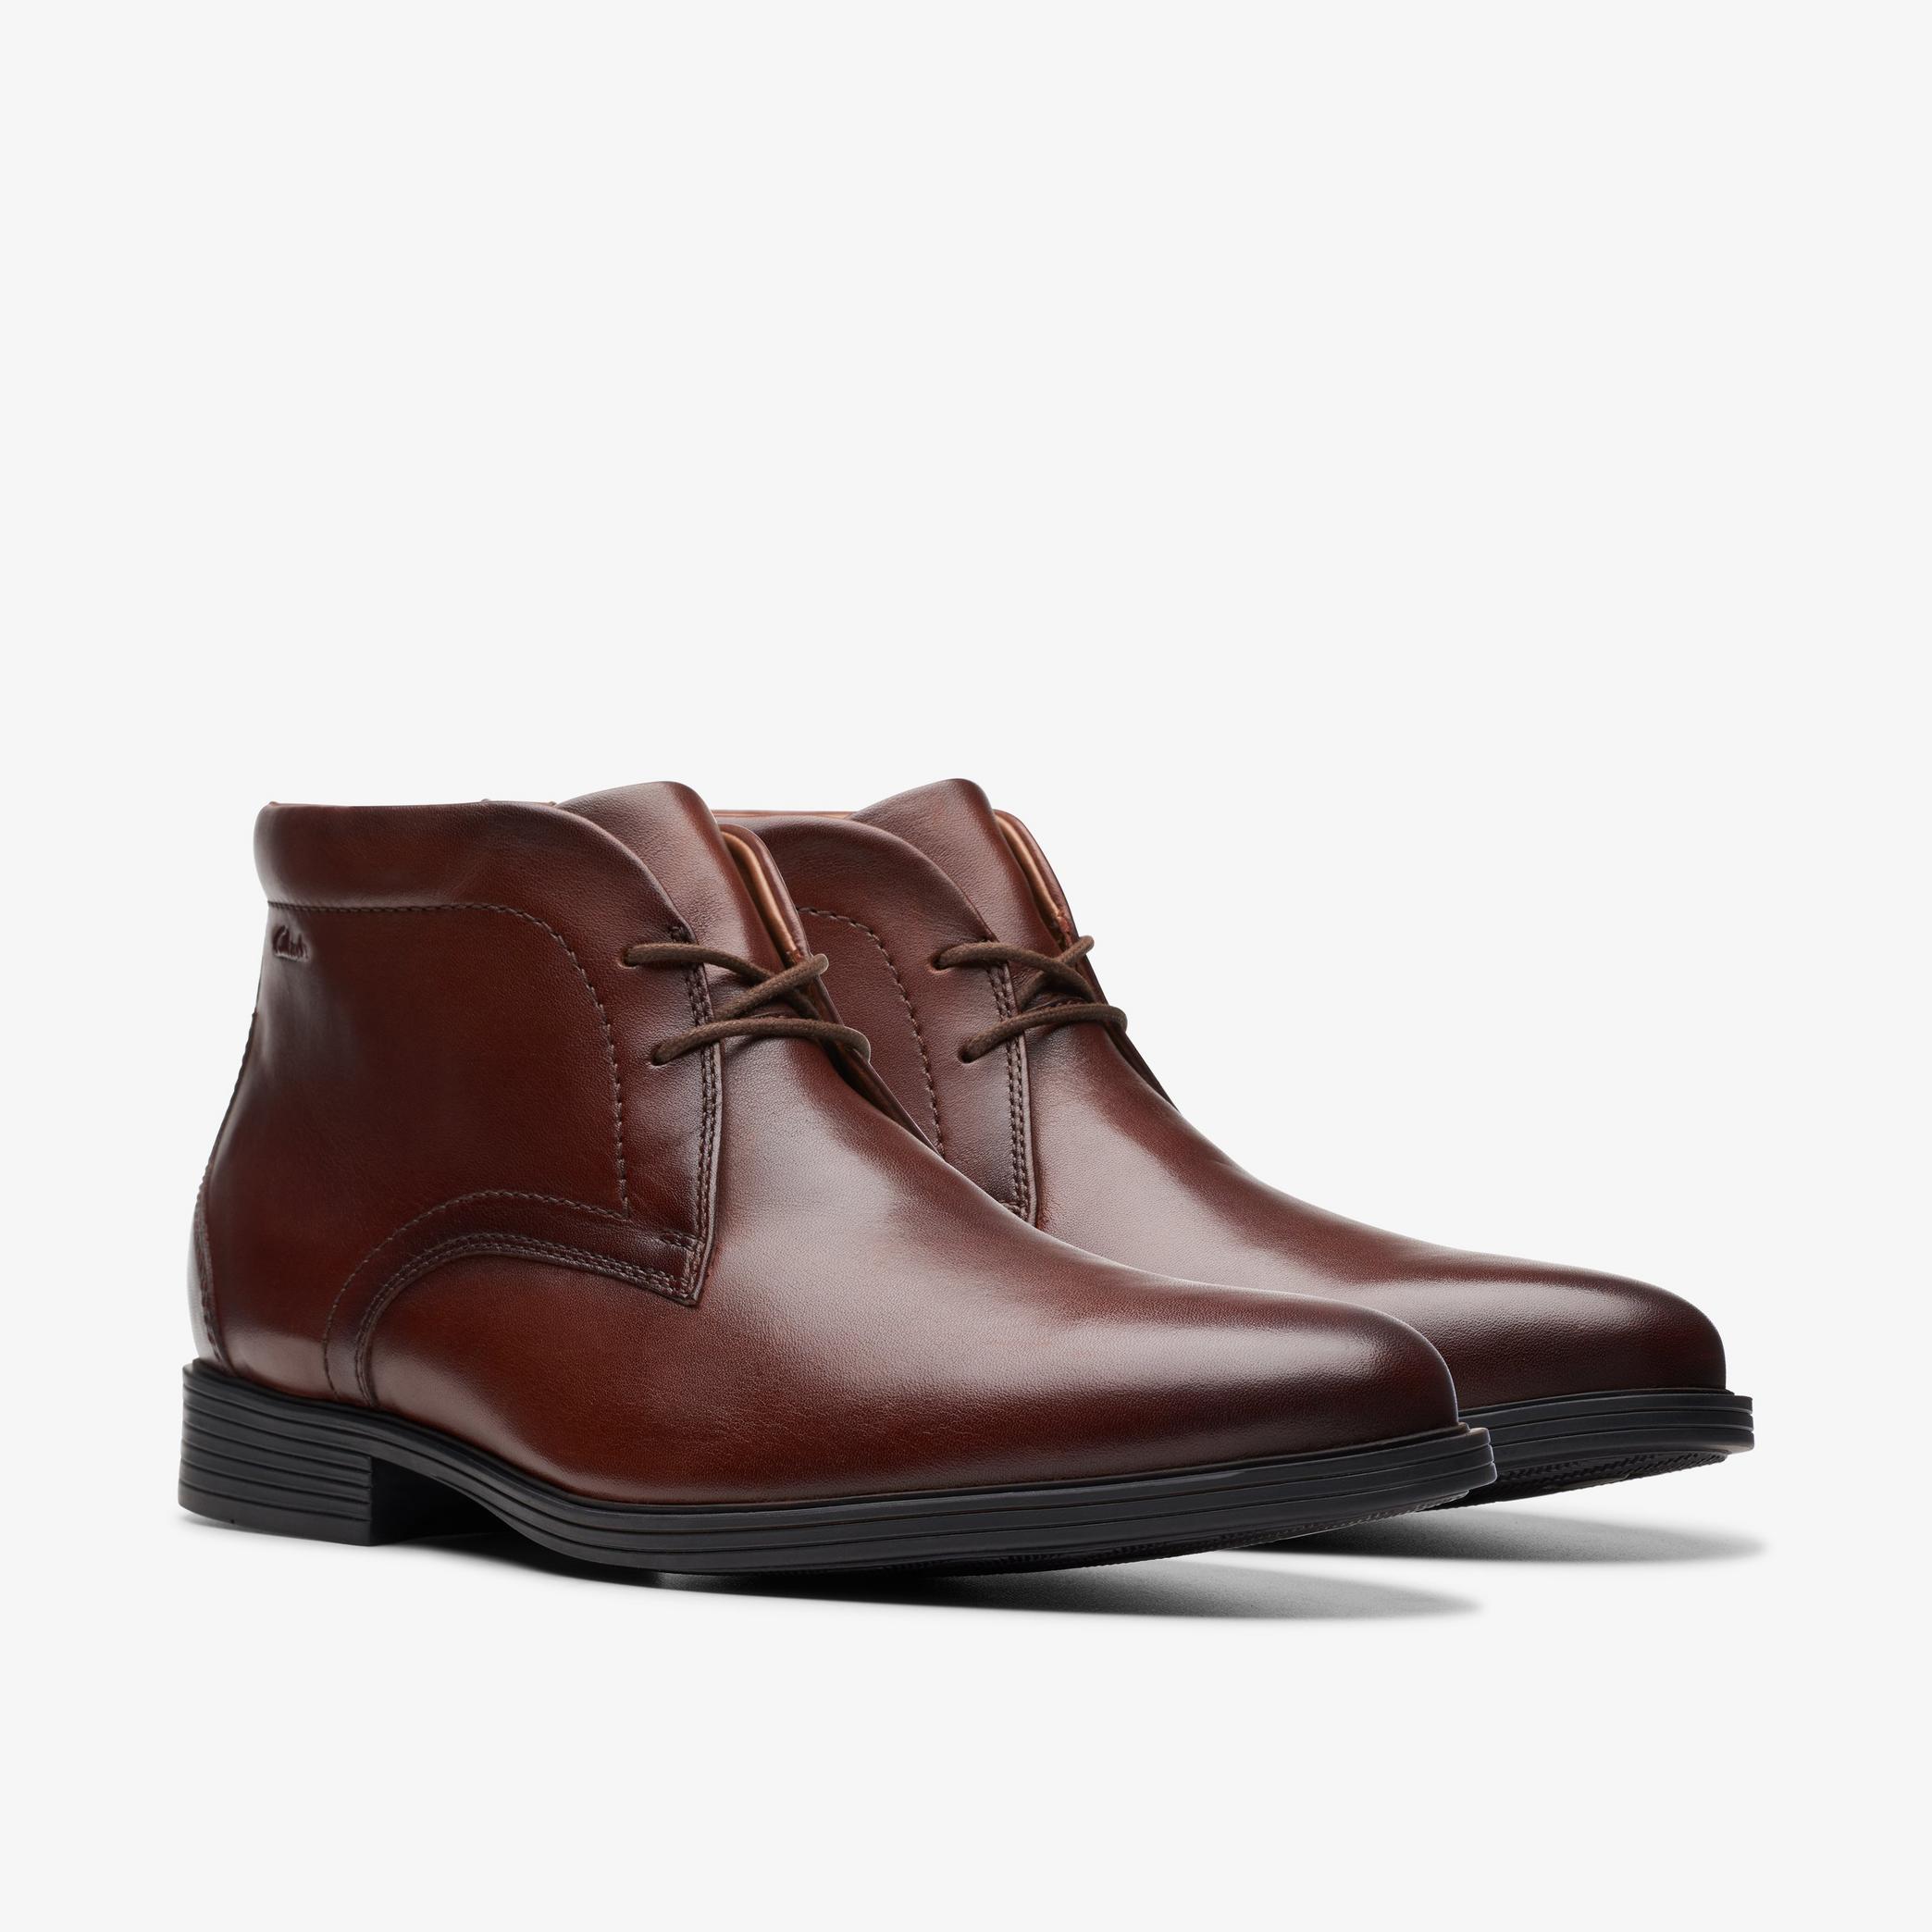 MENS Whiddon Mid Mahogany Leather Ankle Boots | Clarks US